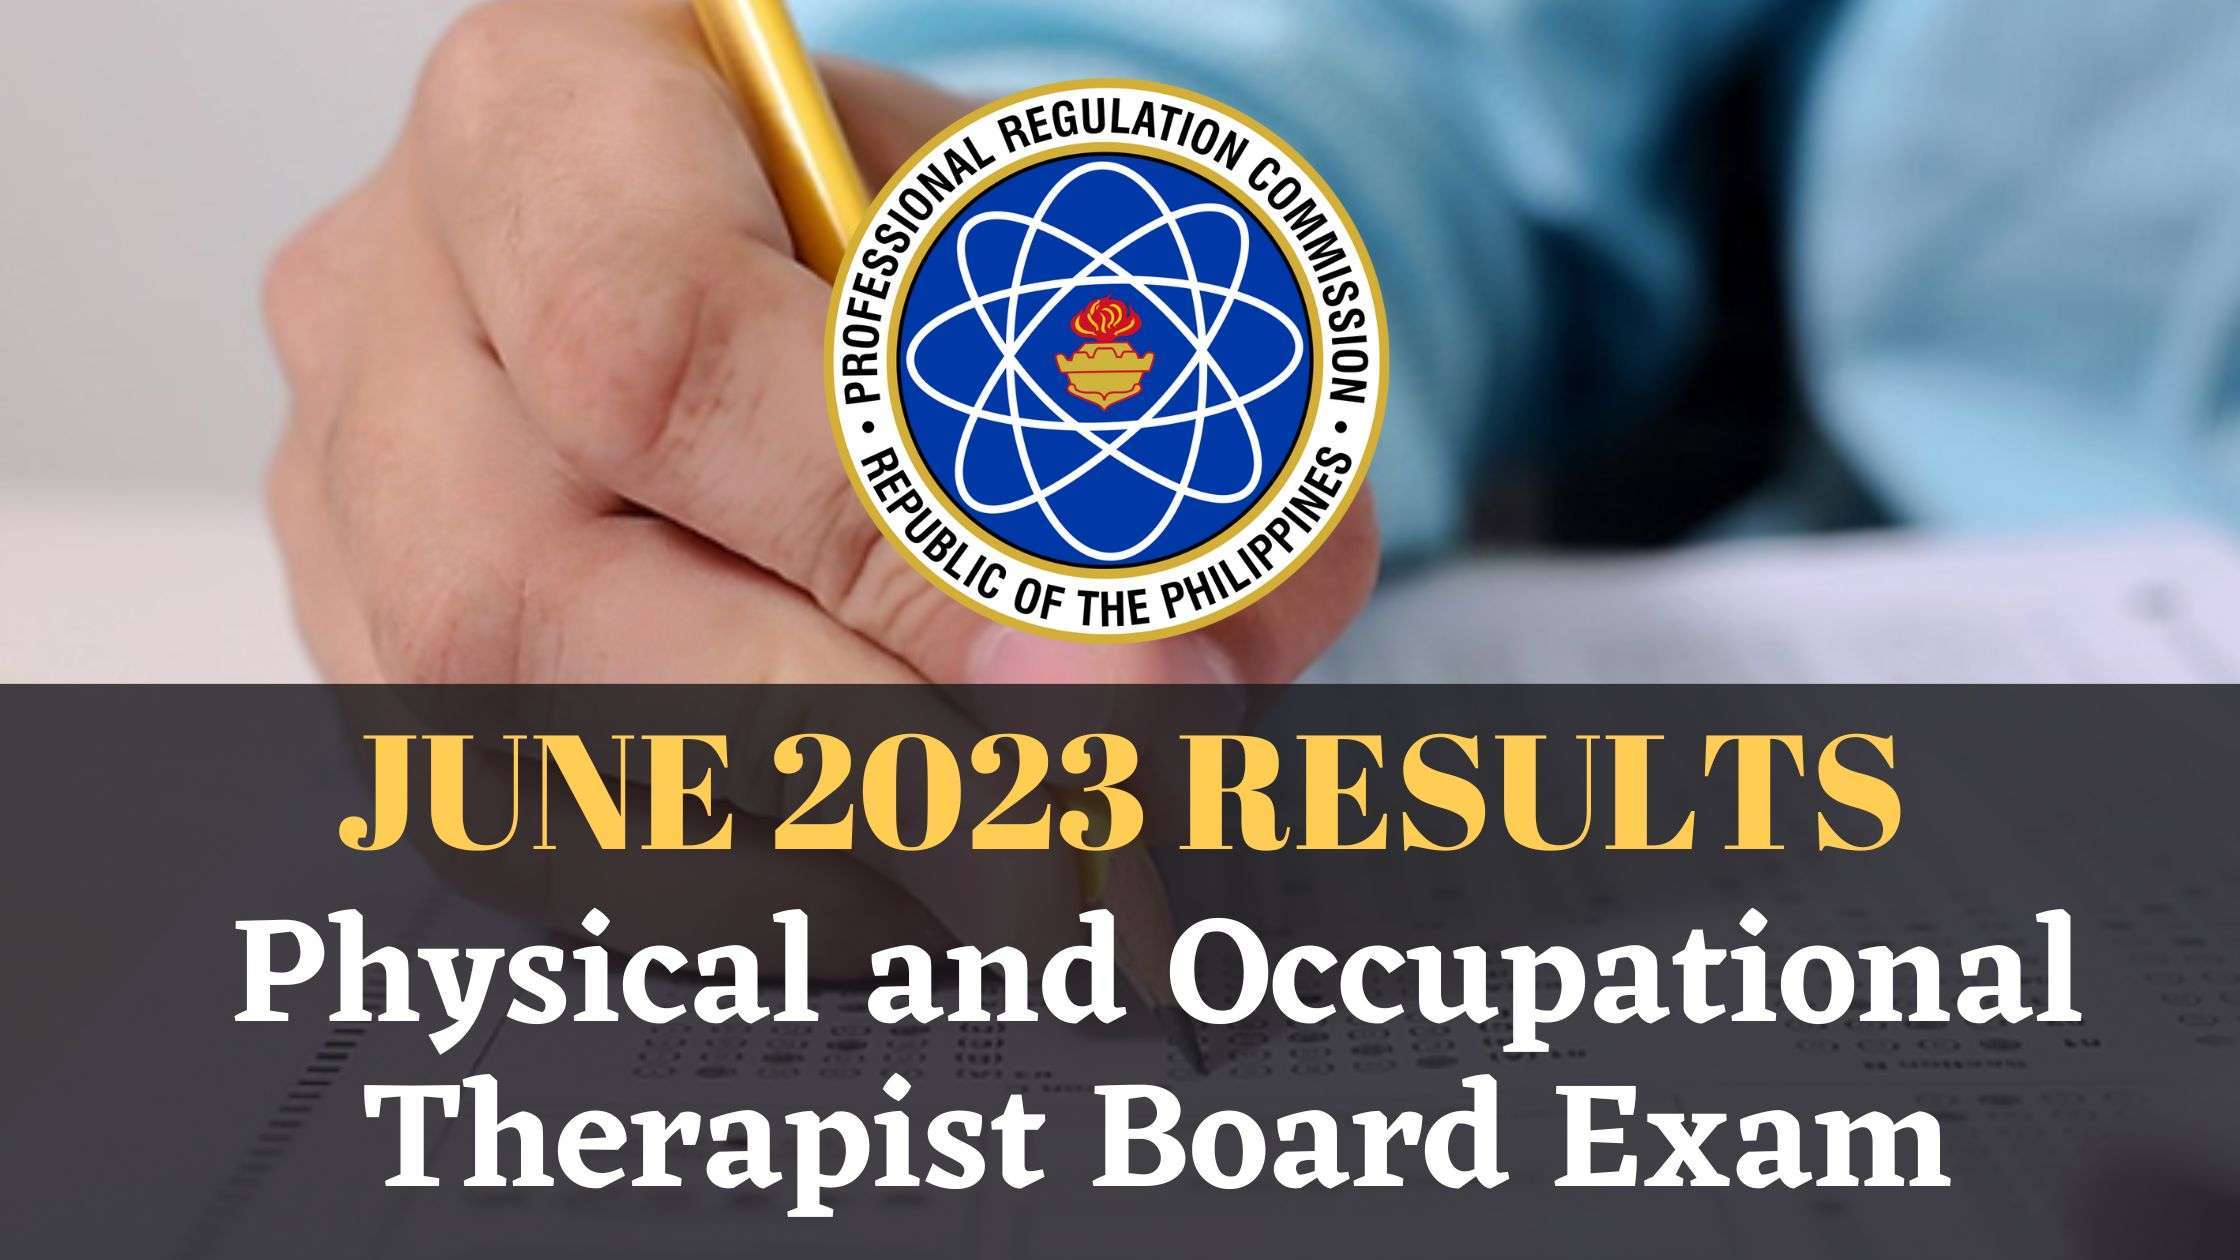 June 2023 Physical and Occupational Therapist Board Exam Results